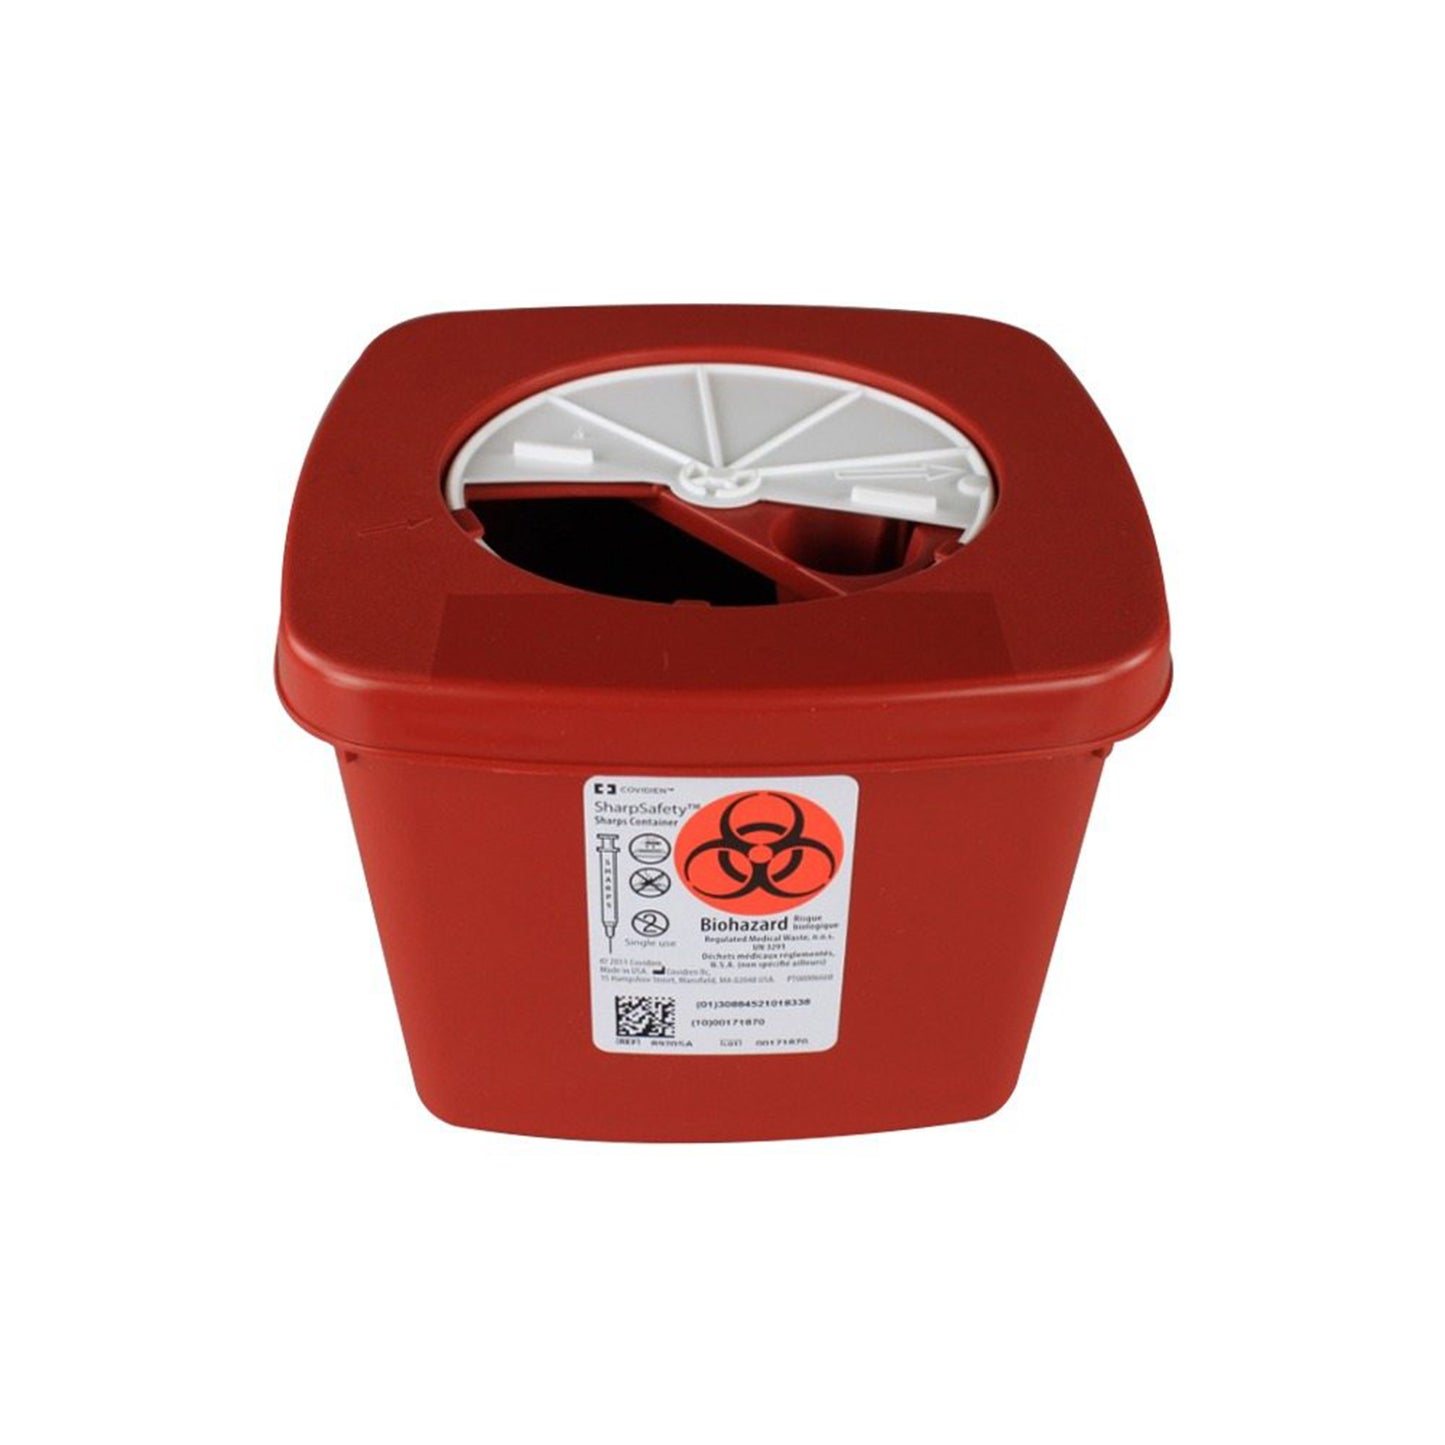 Covidien SharpSafety 8920SA Multi-Purpose Container With Rotor Lid - 60 Units - USA Supply